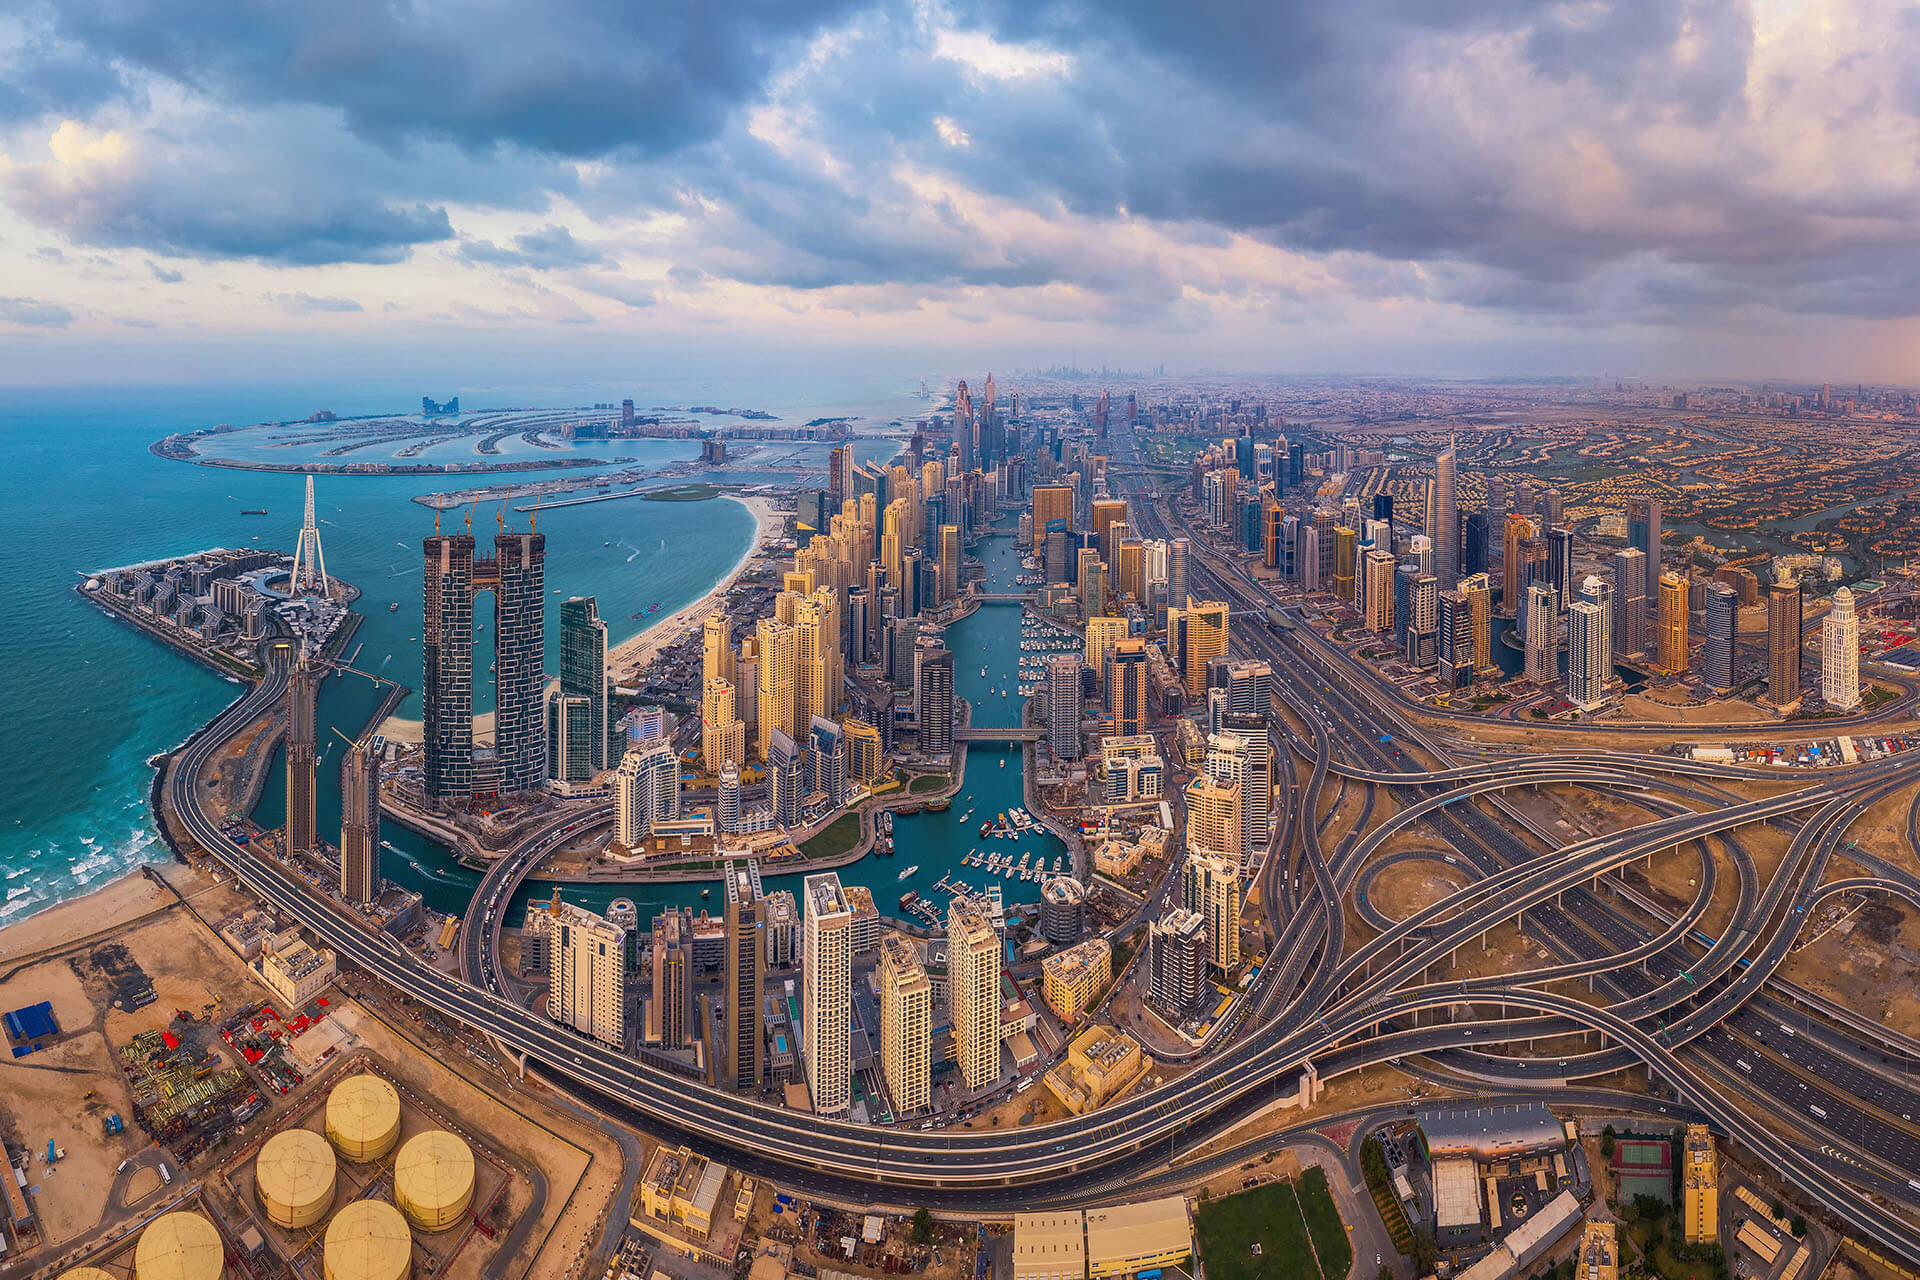 UAE: New Measures for Issuing Stay Permission in Dubai